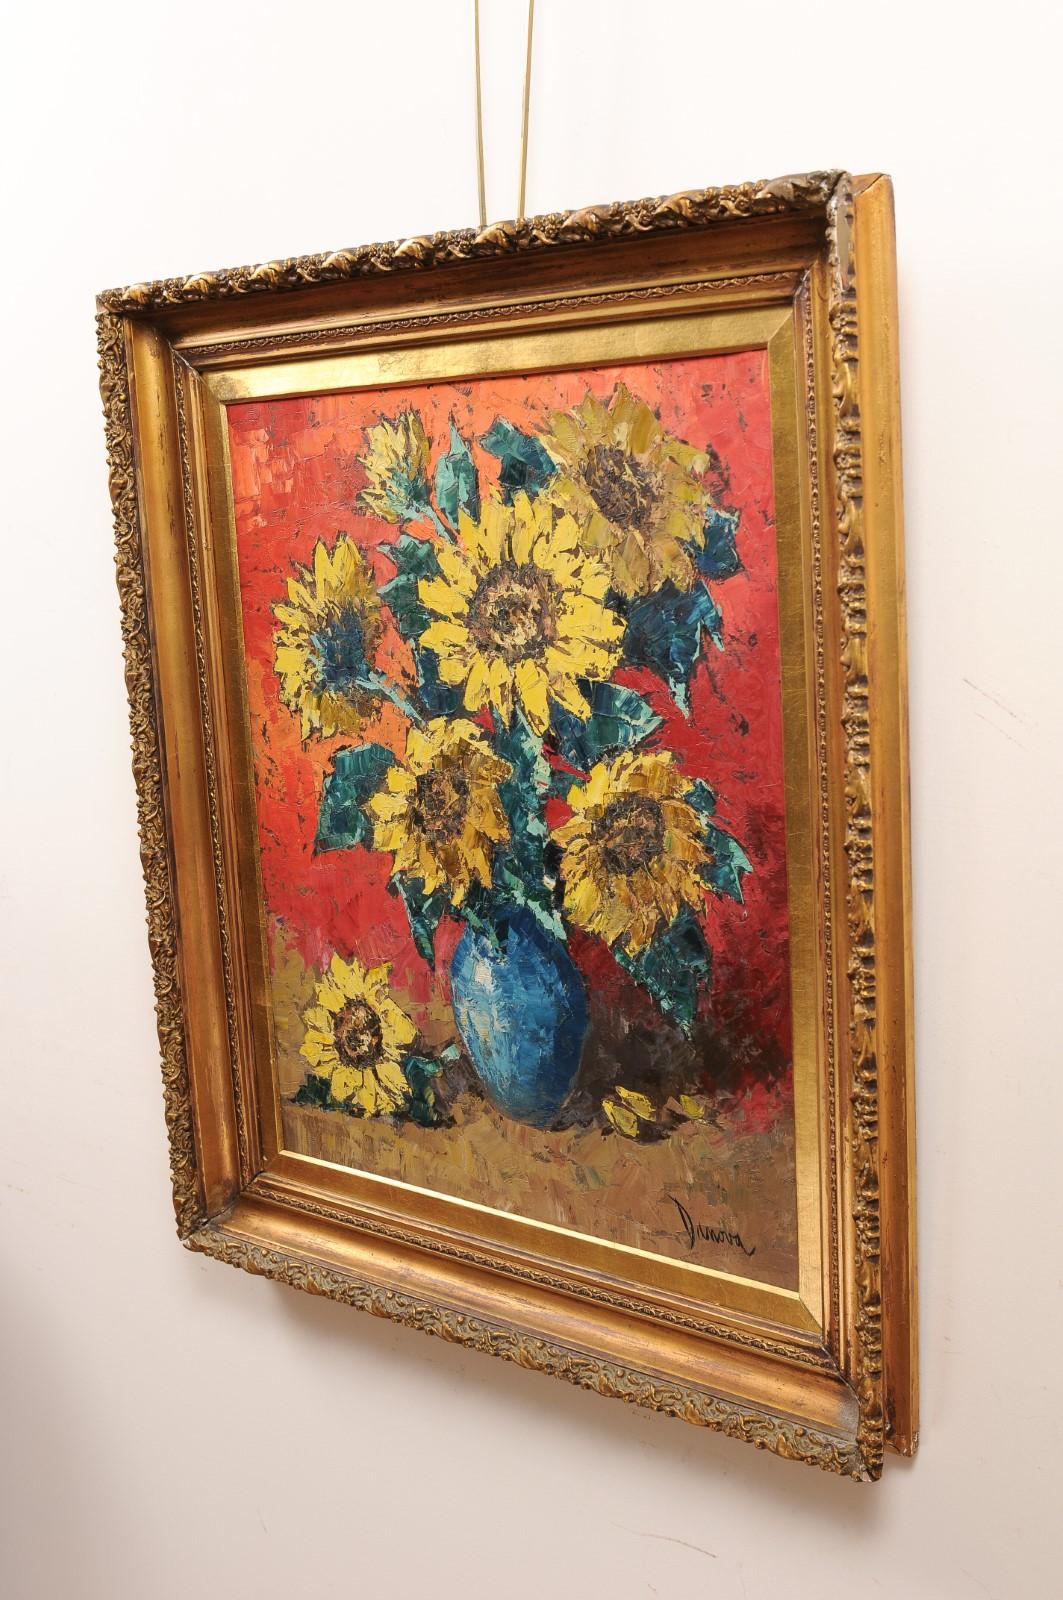  Giltwood Framed Oil on Board Painting of Sunflowers in Vase, Signed, 20th c. For Sale 8